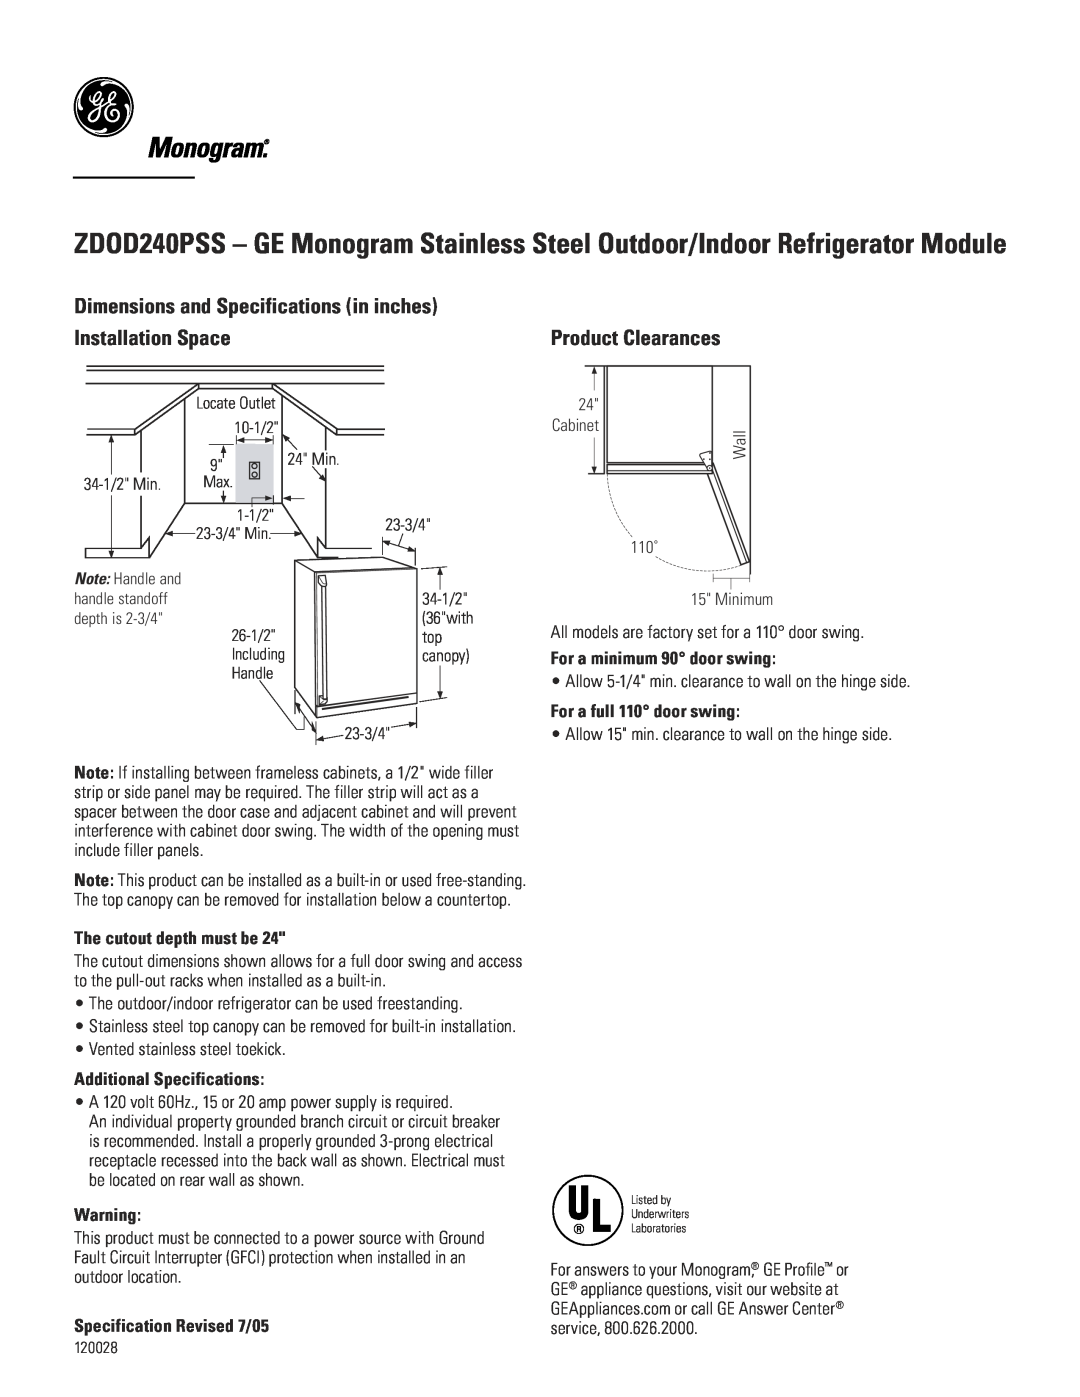 GE Monogram ZDOD240PSS dimensions Product Clearances, For a minimum 90 door swing, For a full 110 door swing 